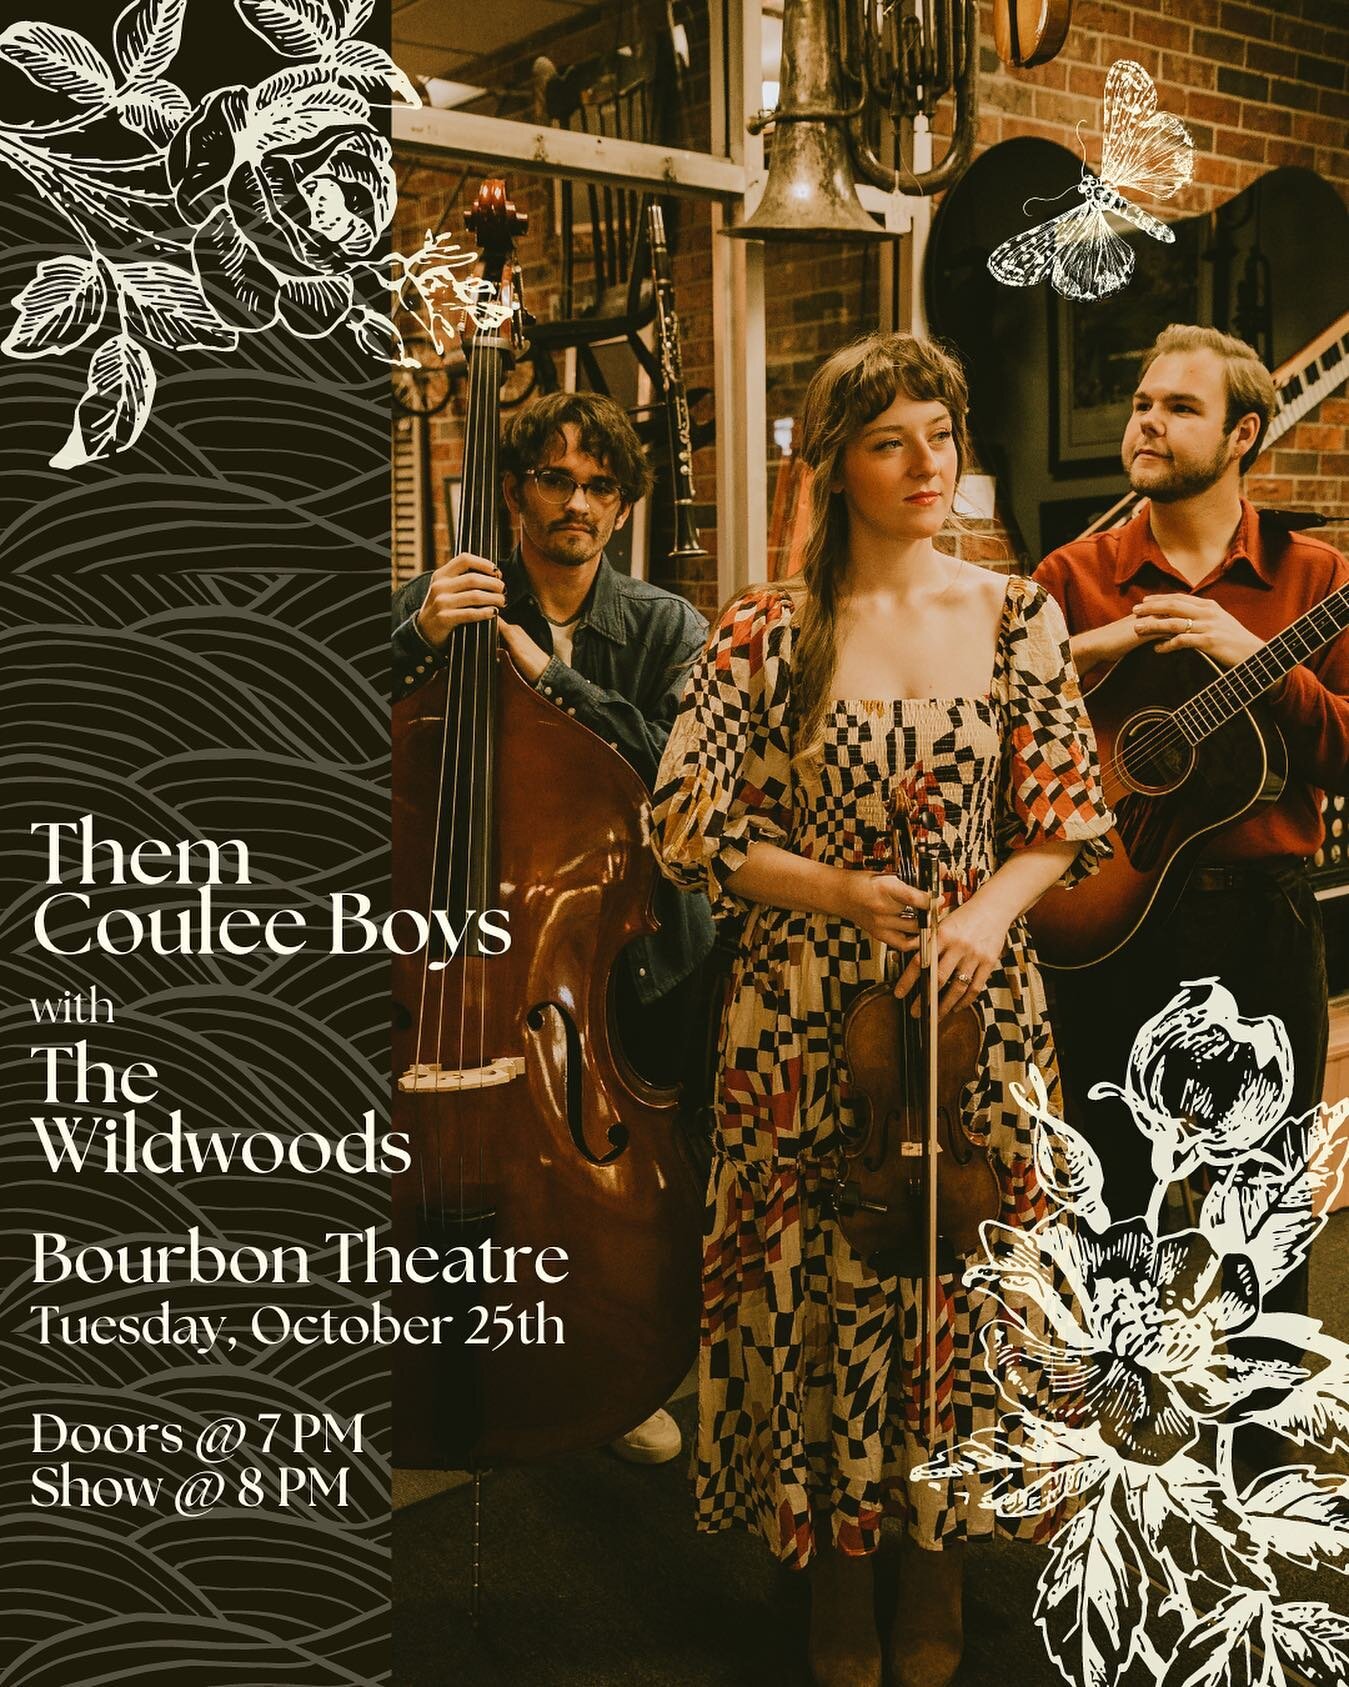 Hey Lincoln friends! We&rsquo;re opening up for our pals @themcouleeboys at @thebourbontheatre tomorrow night (Tuesday, 10/25) and we would loooove to see you there! These fellas are bringin&rsquo; the heat and we can&rsquo;t wait to show them what L